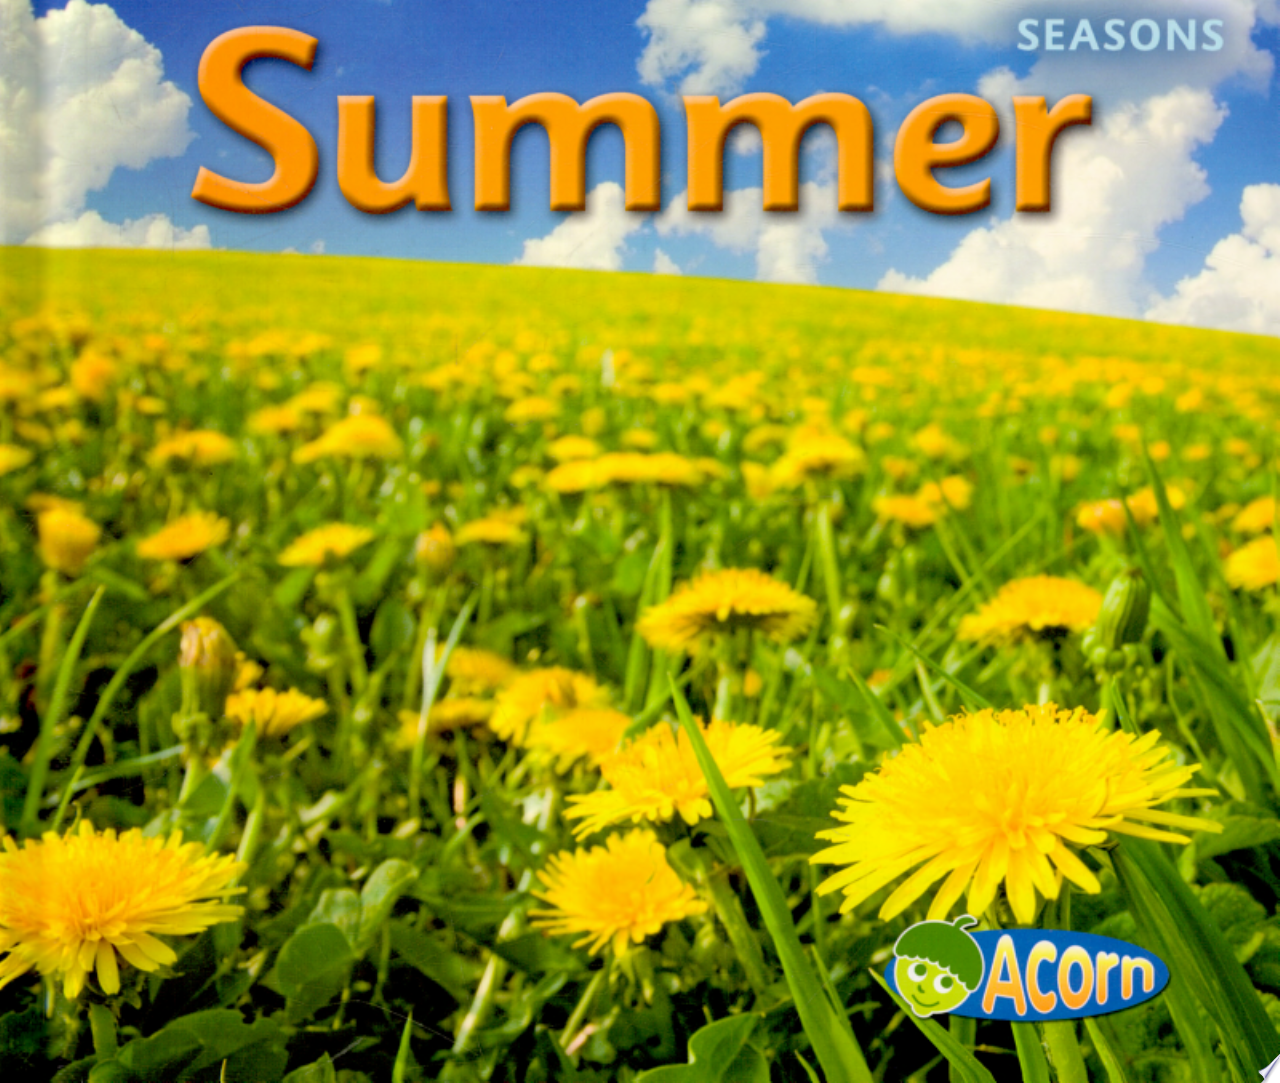 Image for "Summer"